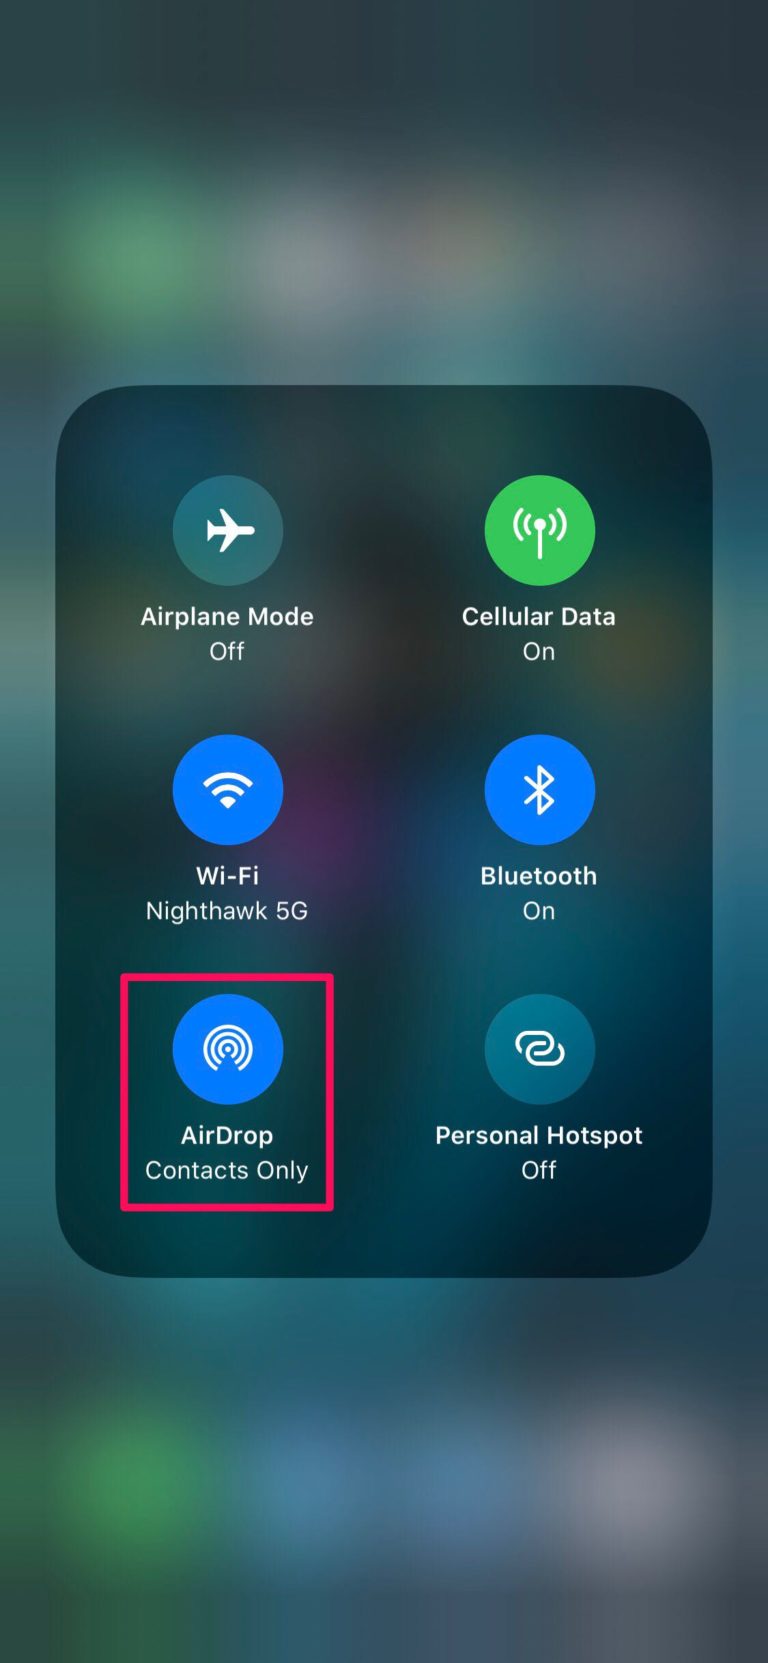 How to Use AirDrop on iPhone & iPad